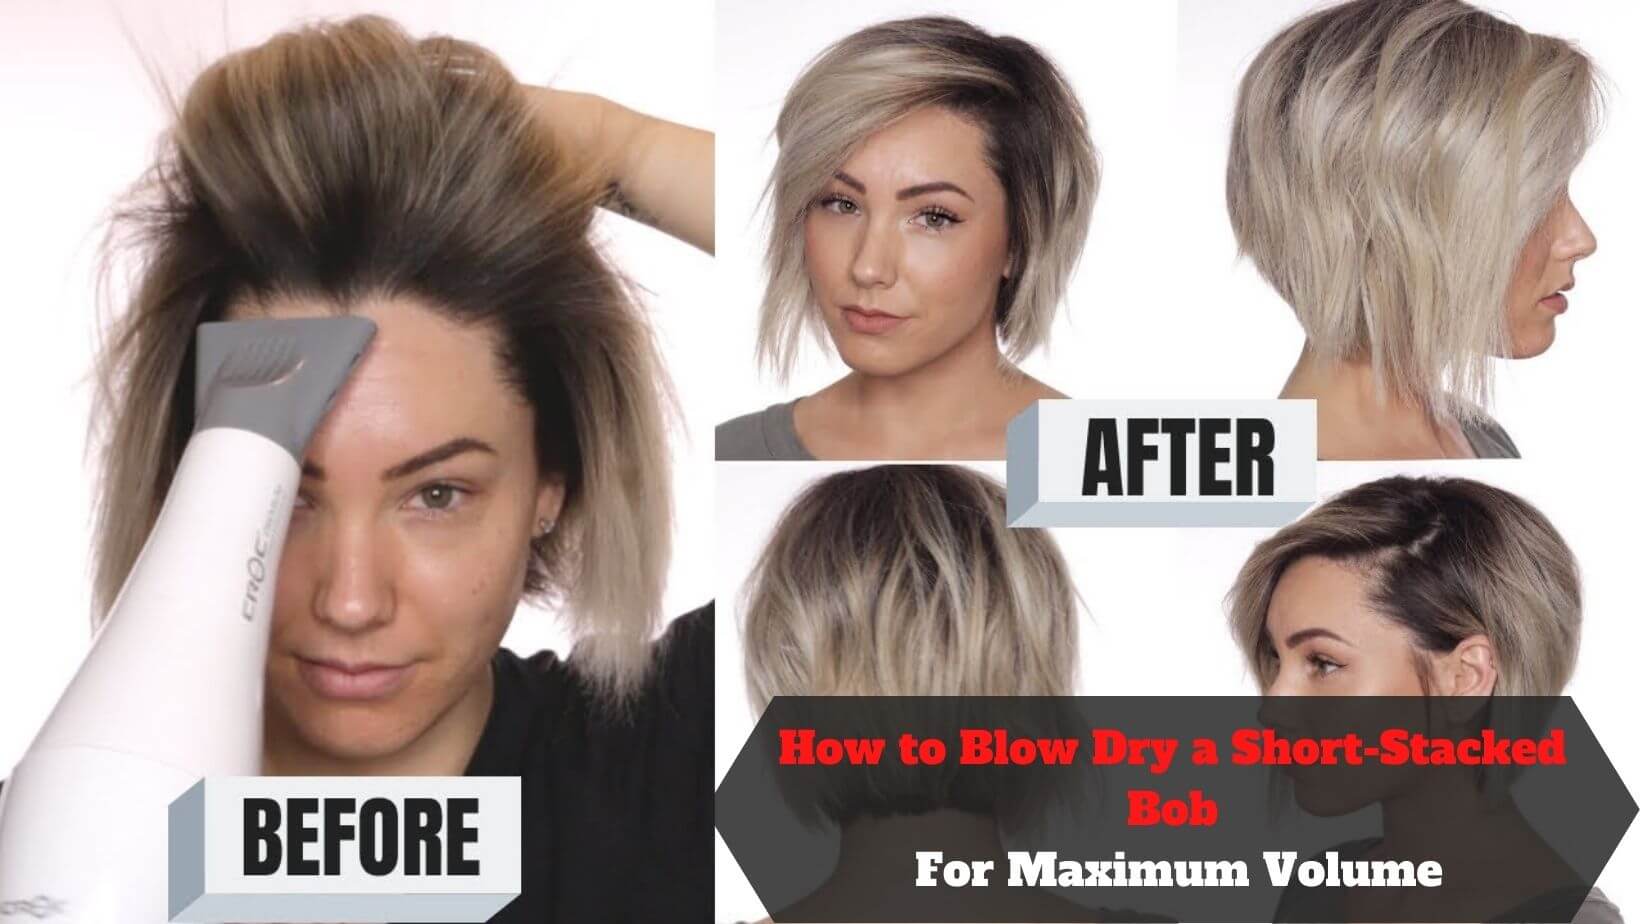 How to Blow Dry a Short-Stacked Bob